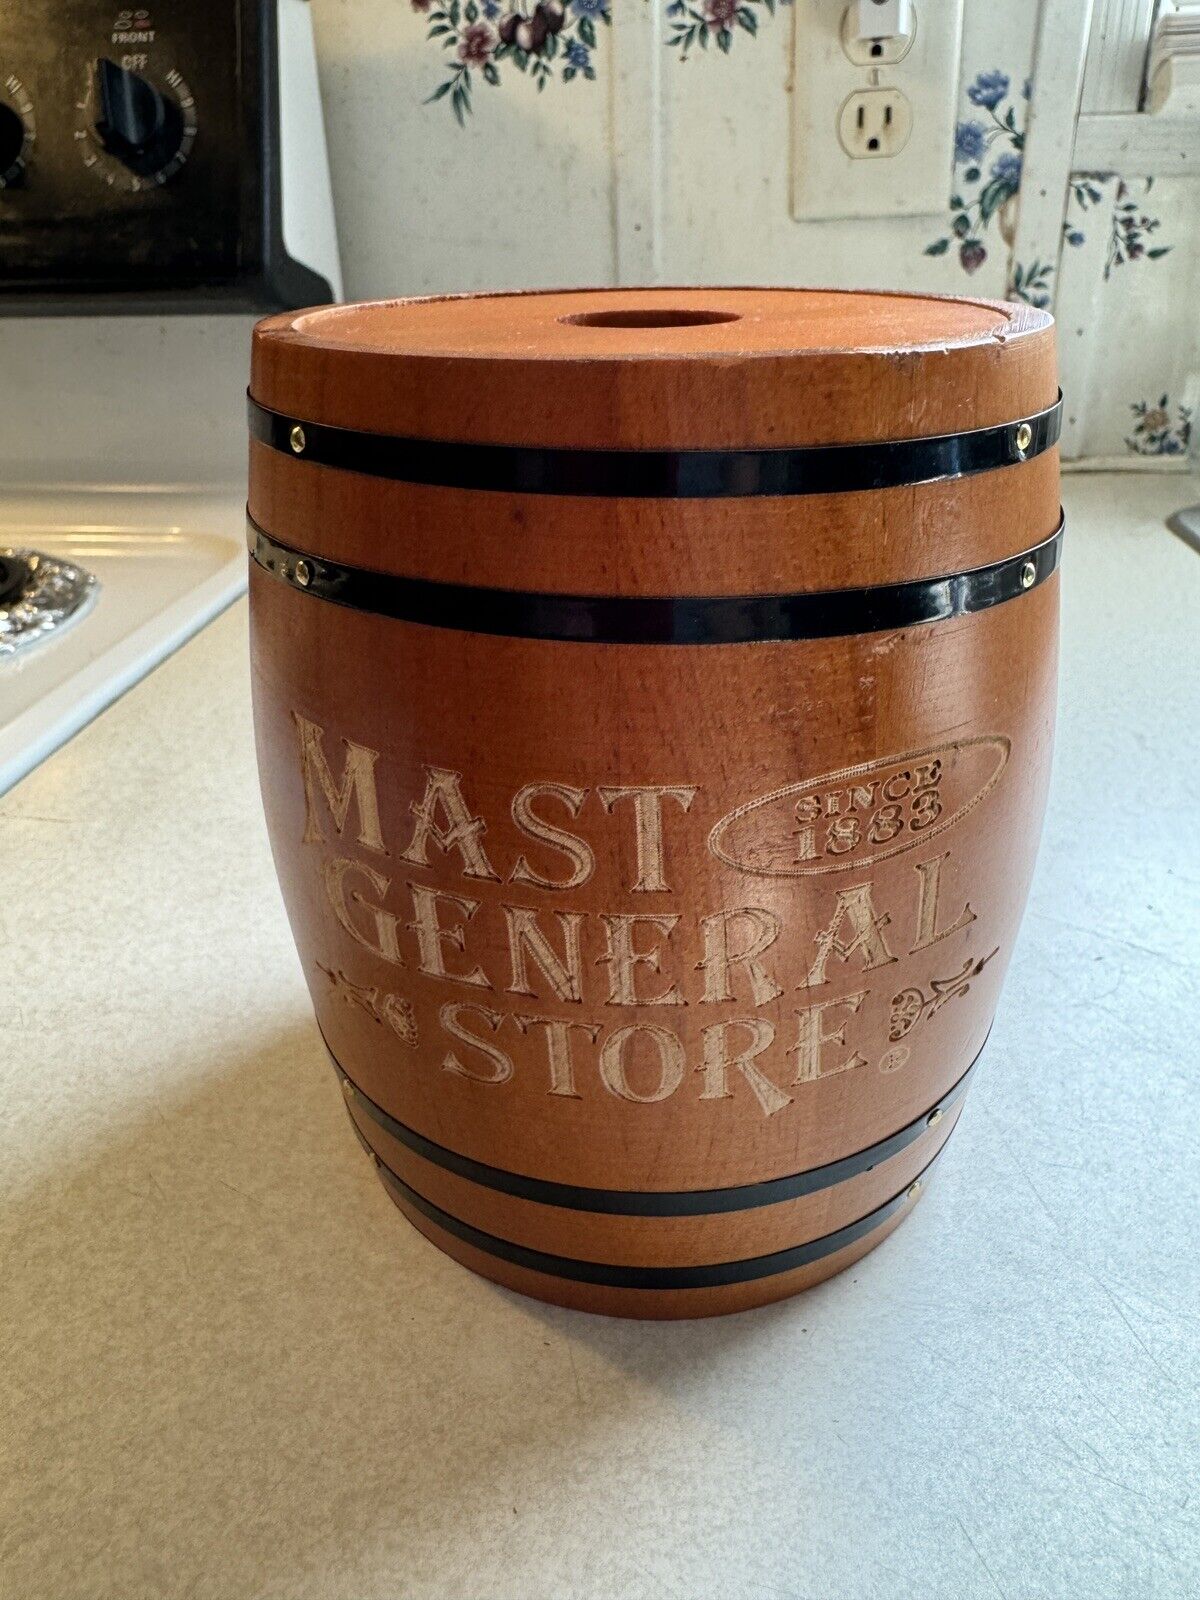 Mast General Store Wooden Barrel With Lid